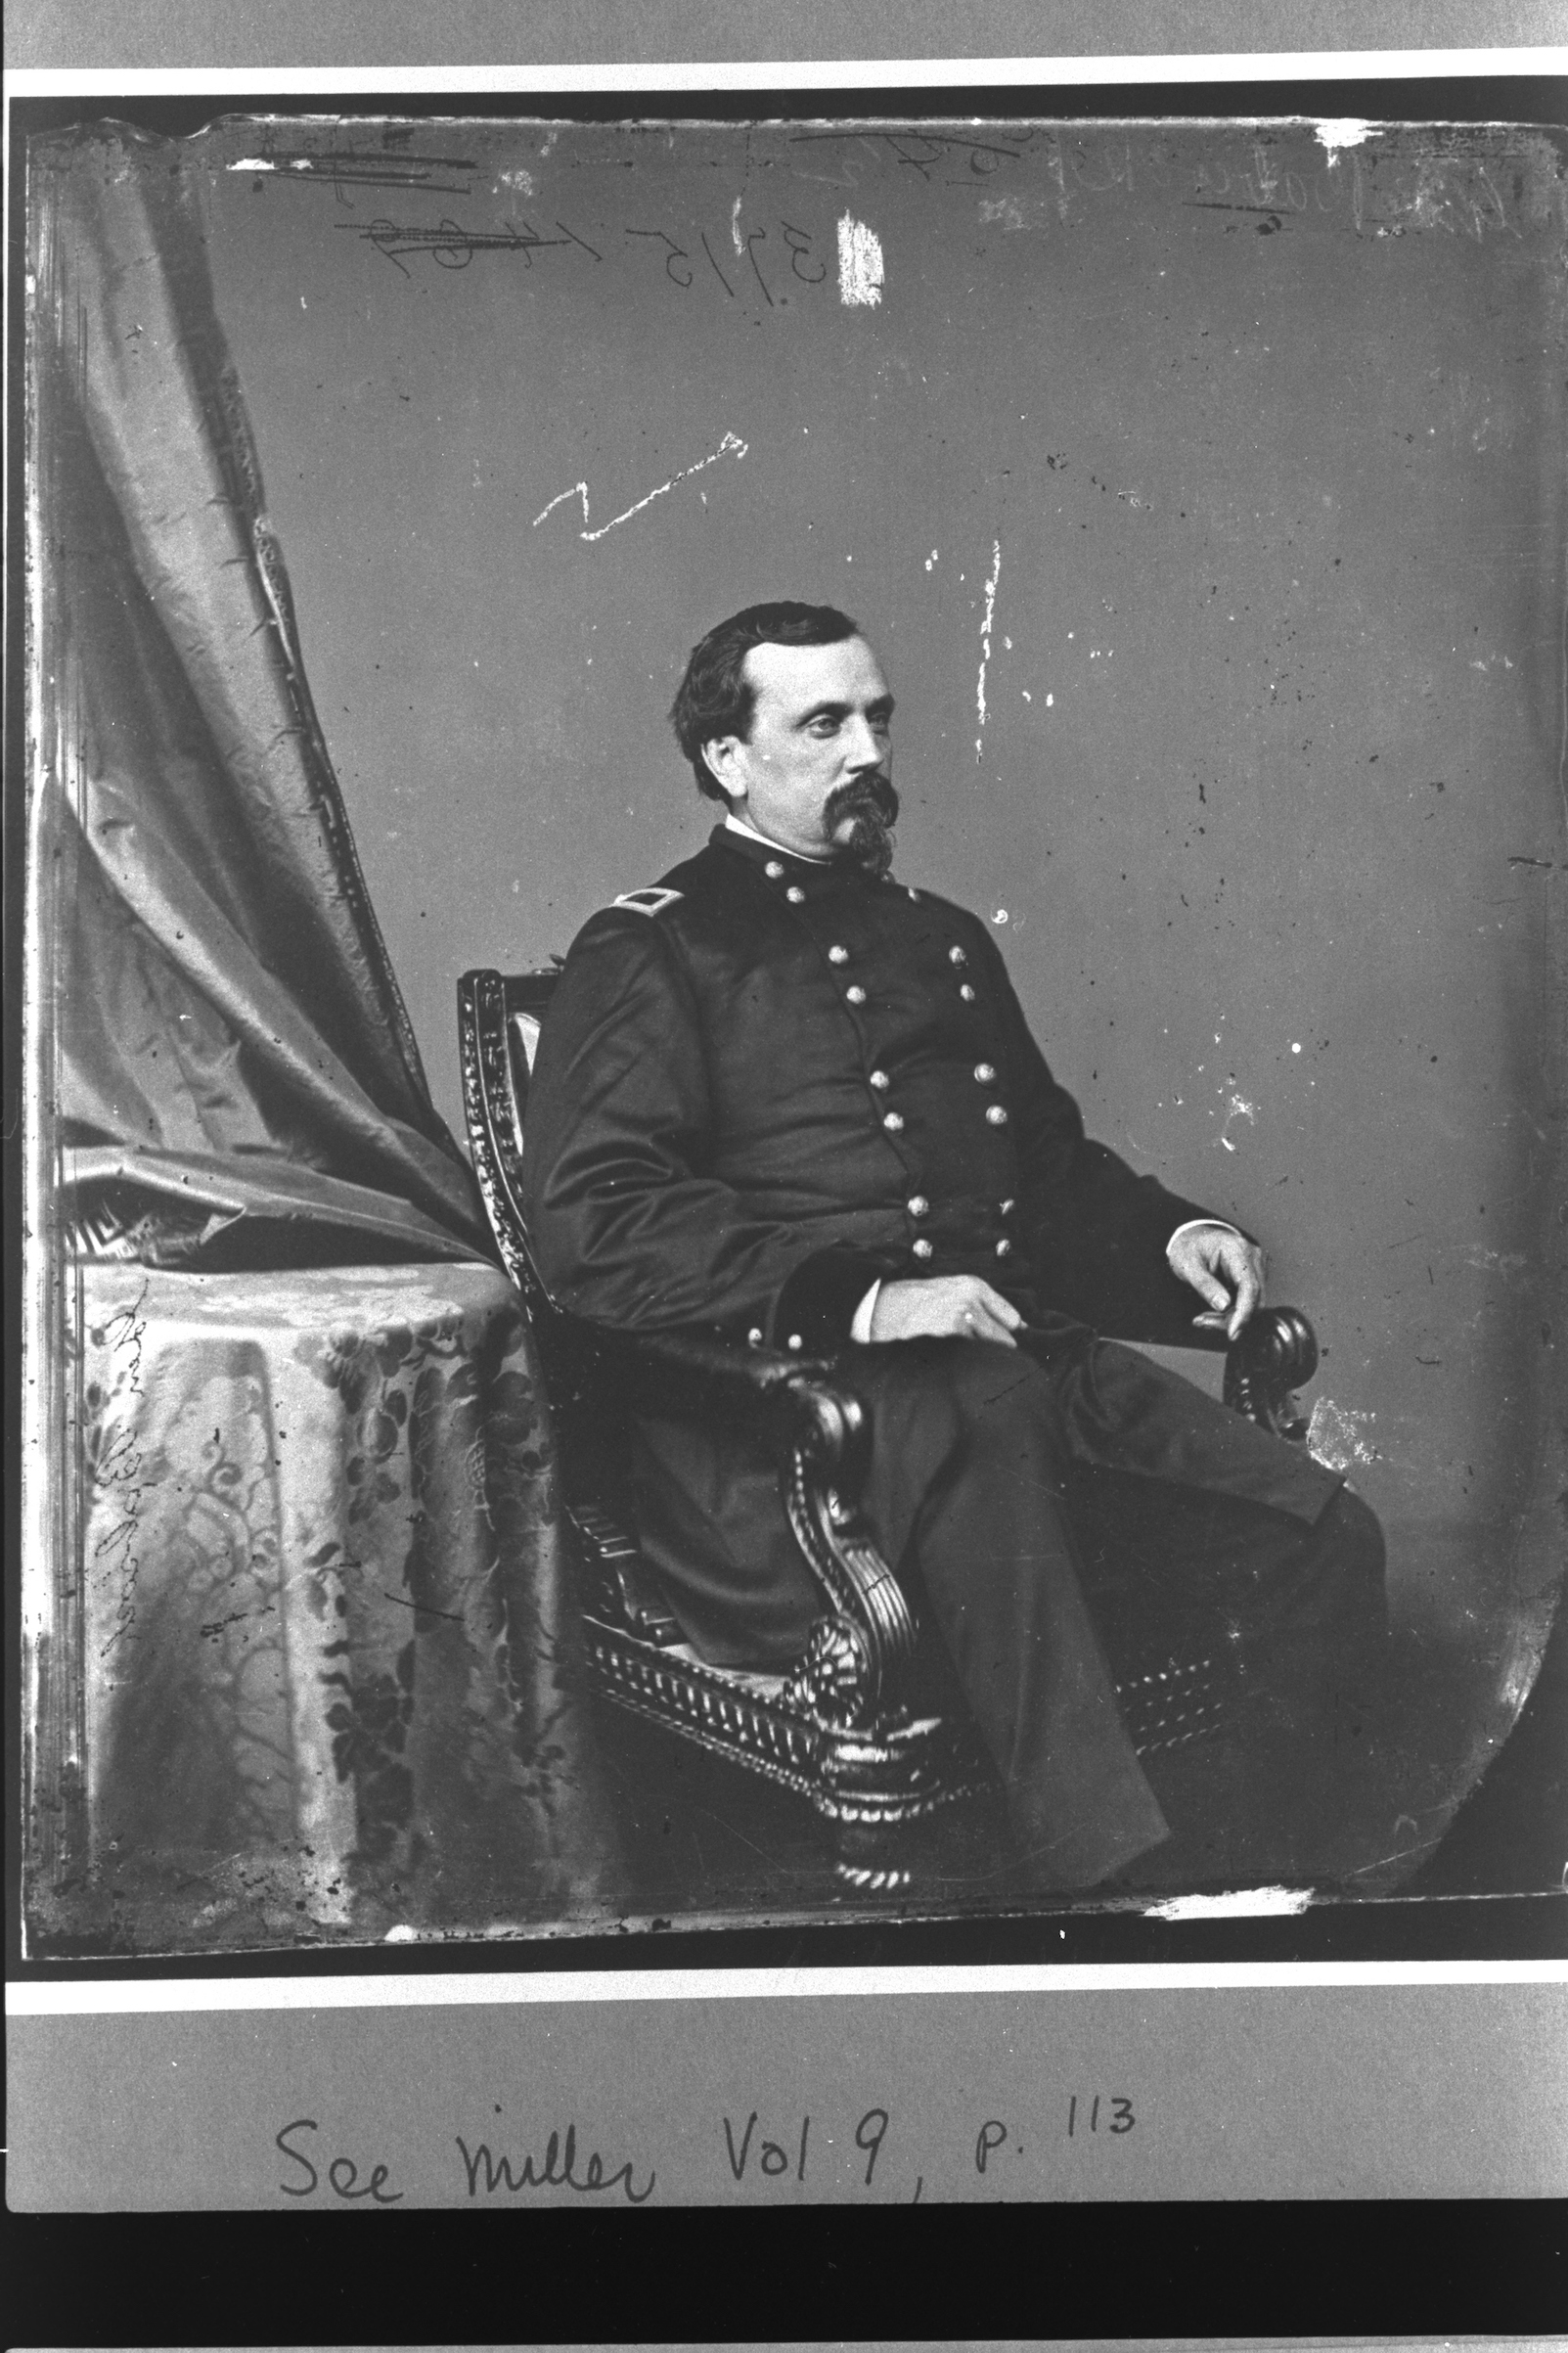 Orville Babcock was an American military officer. He was an aide-de-camp to General Grant during the Civil War, and then was his private secretary when Grant was president. (Corbis/Getty Images)